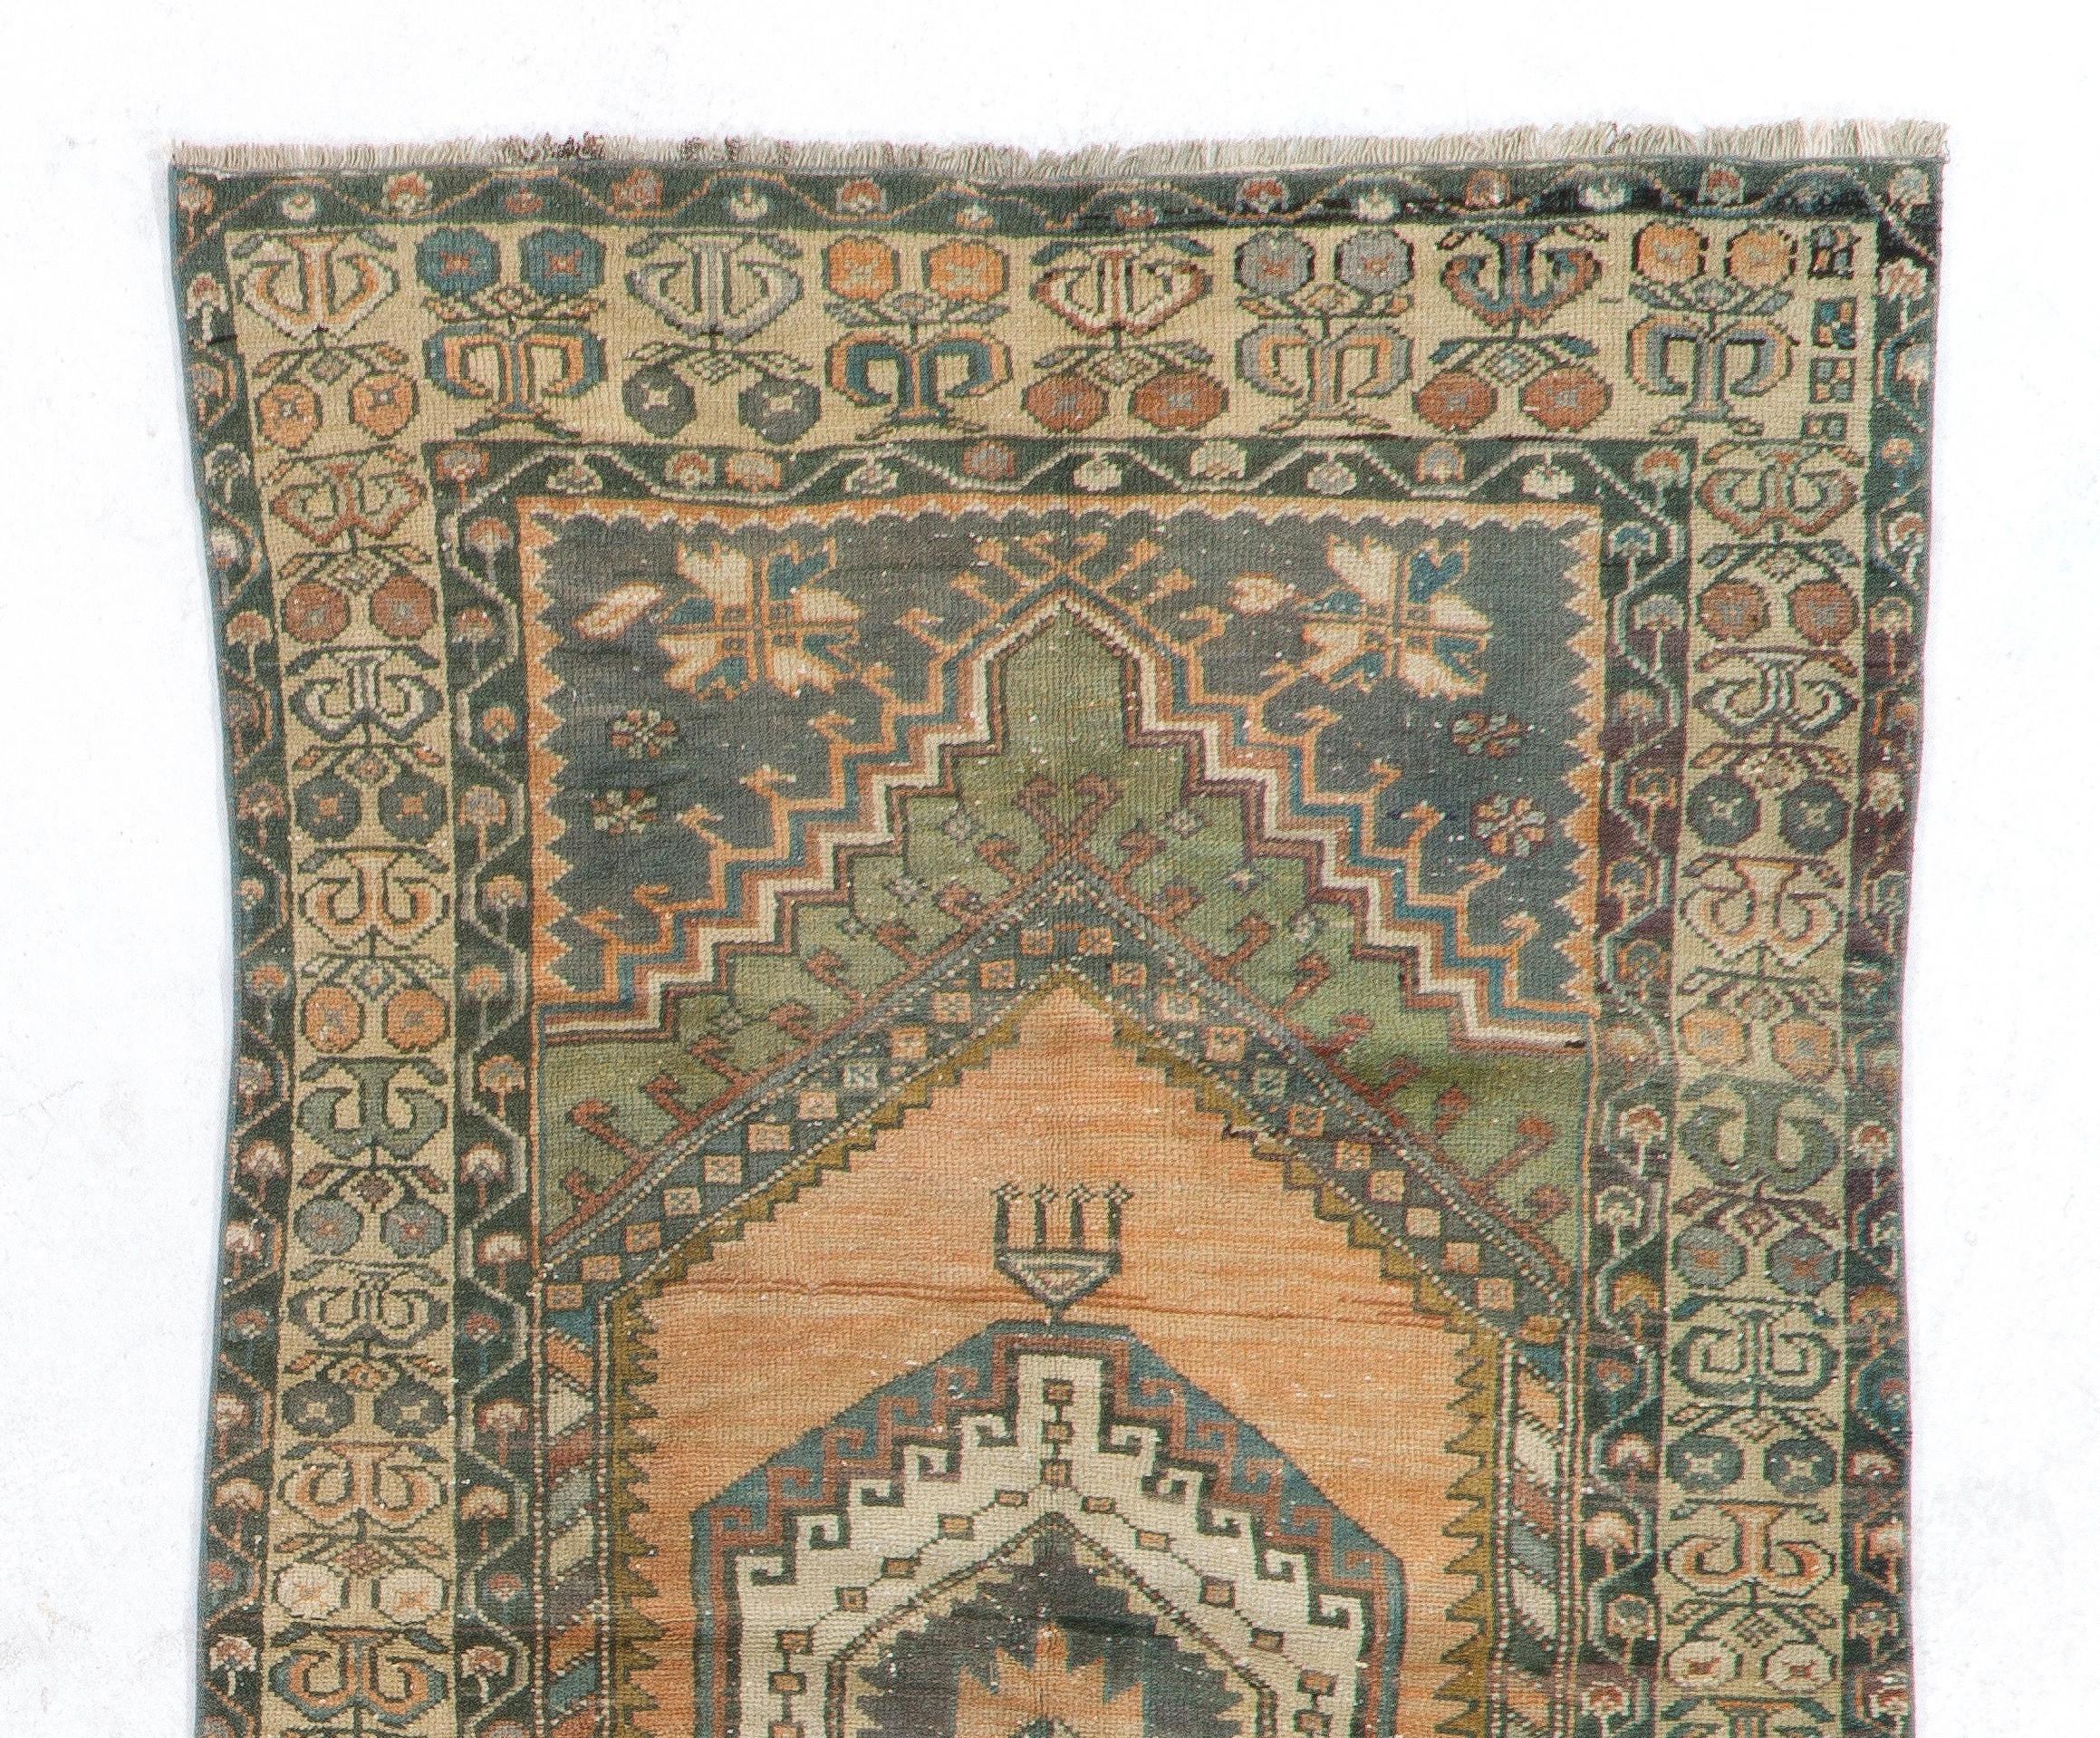 This vintage Central Anatolian rug features two linked medallions in deep-saturated gold with cross-shaped motifs inside against a plain field in soft muted soft red. The corner-pieces in charcoal gray are decorated with large, elongated palmettes.